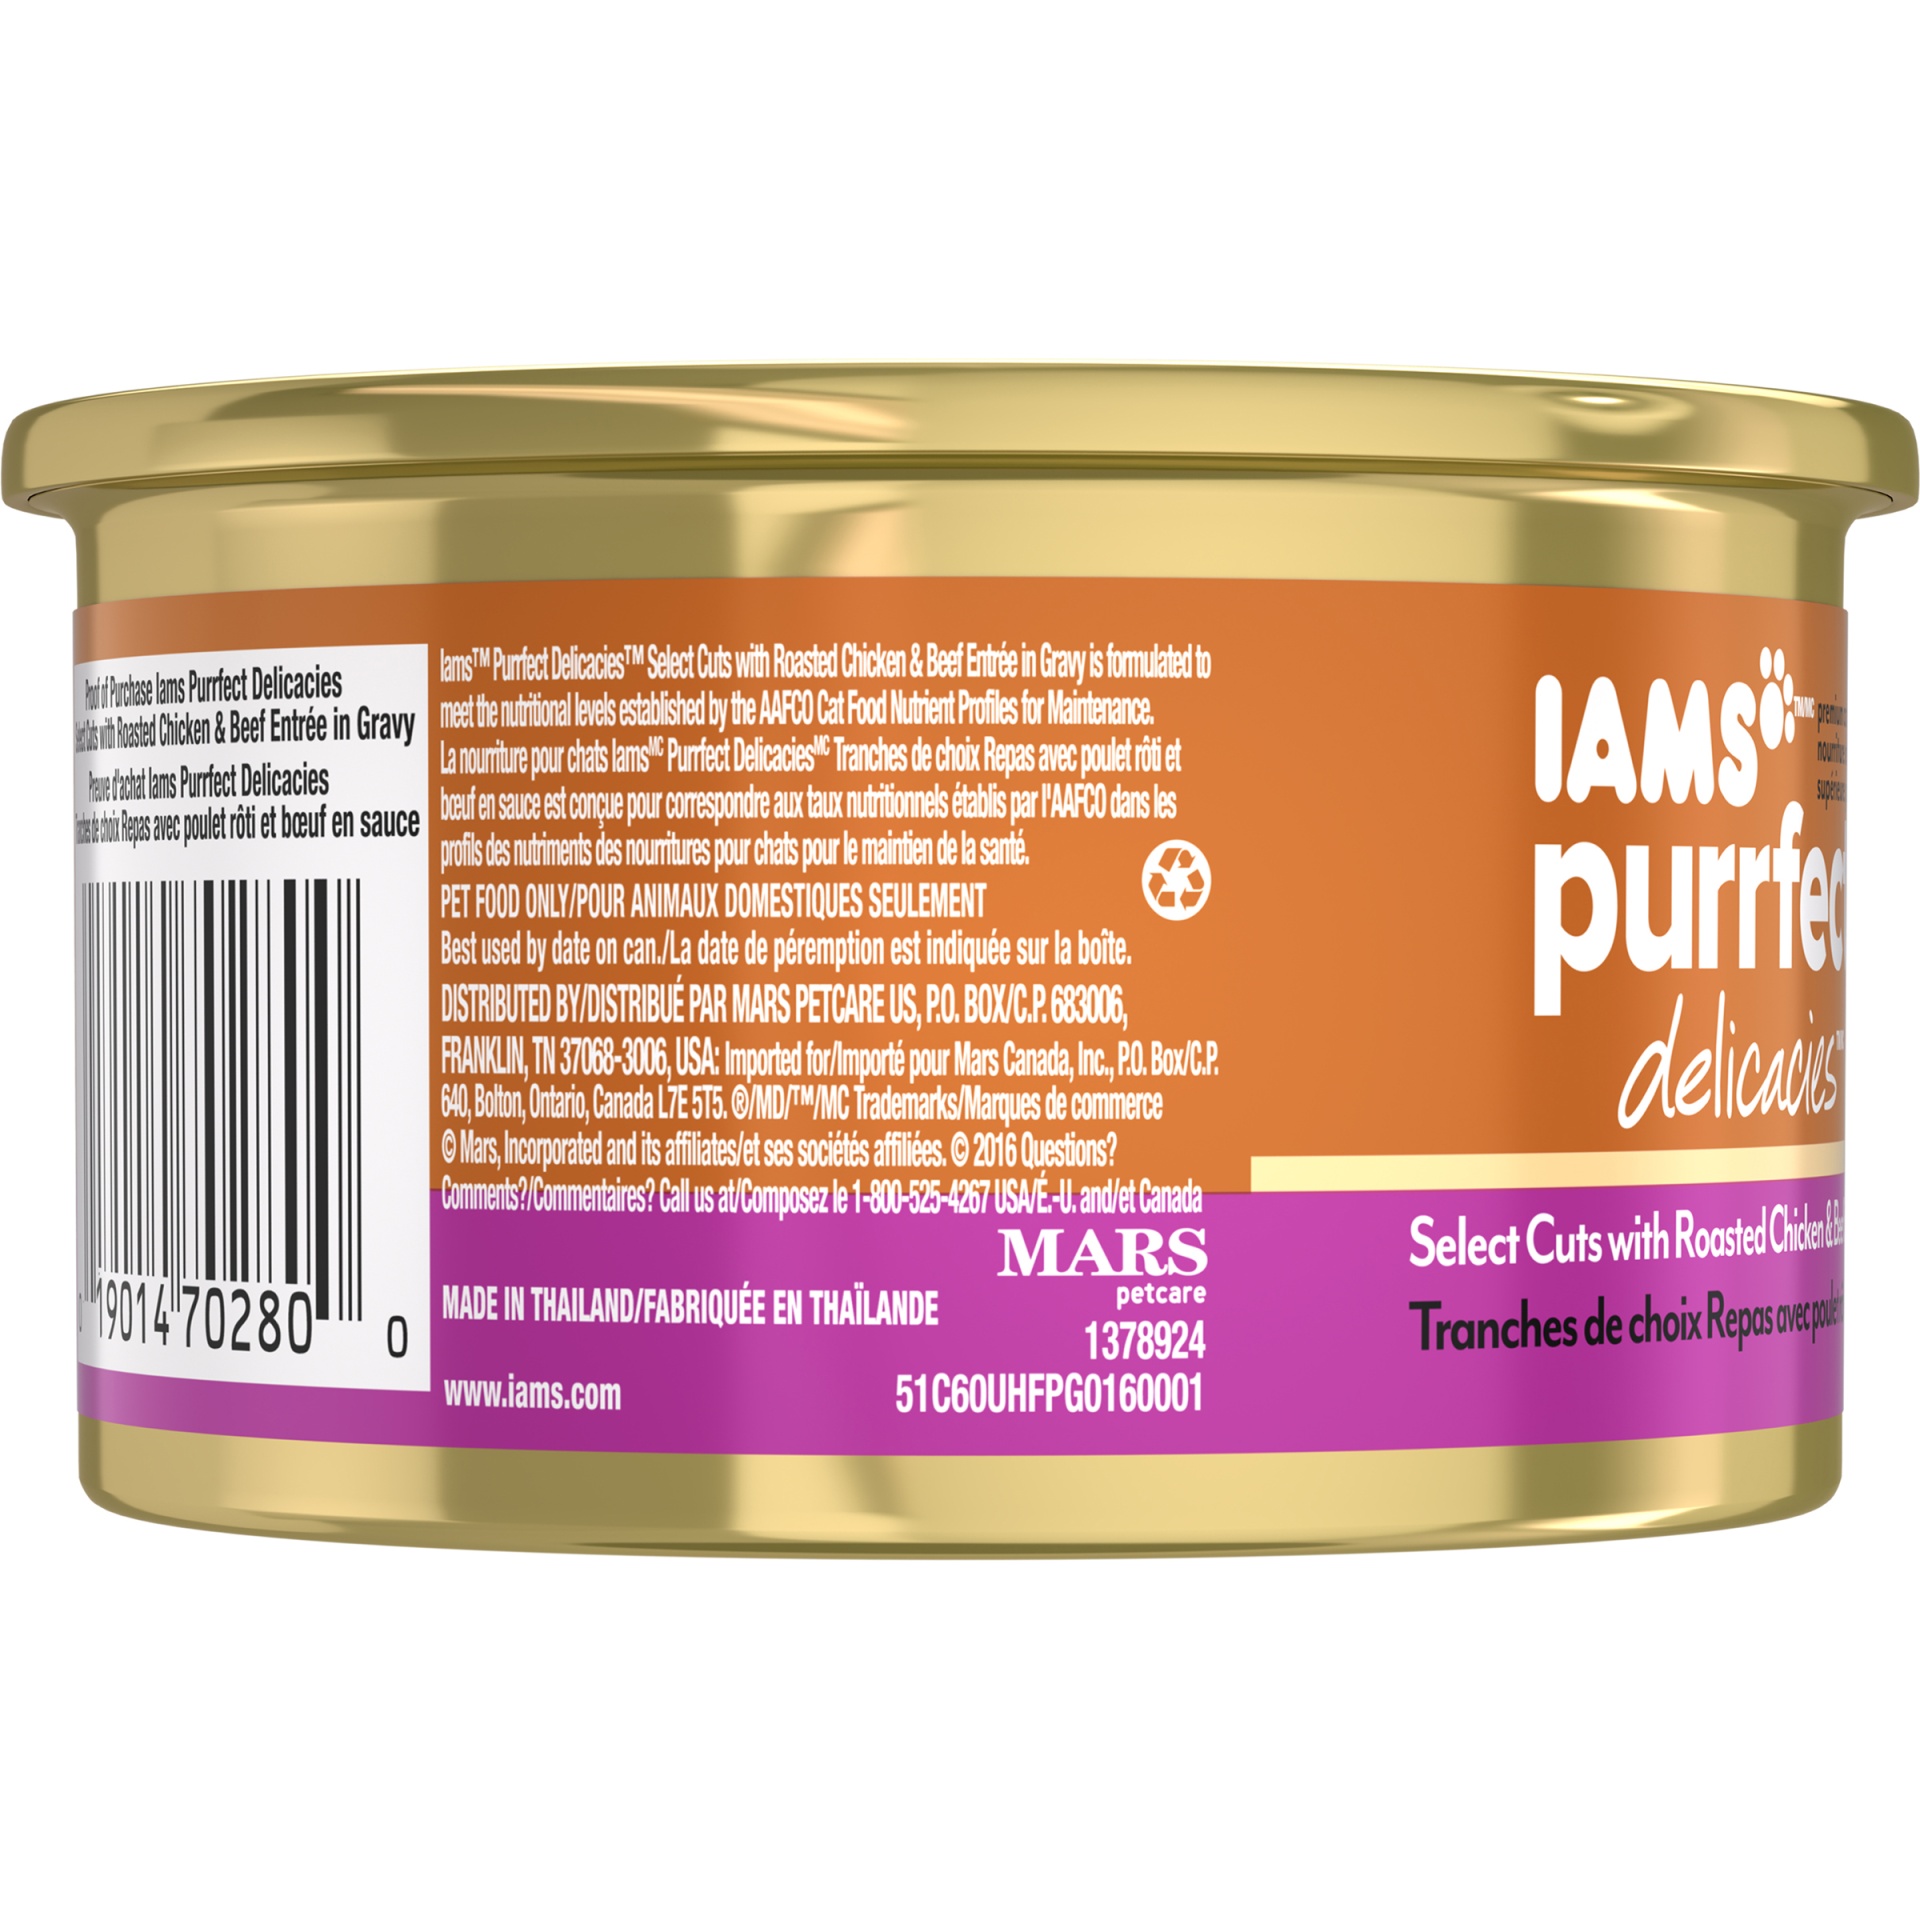 slide 2 of 7, IAMS Purrfect Delicacies Select Cuts With Roasted Chicken & Beef Entre In Gravy, 2.47 oz